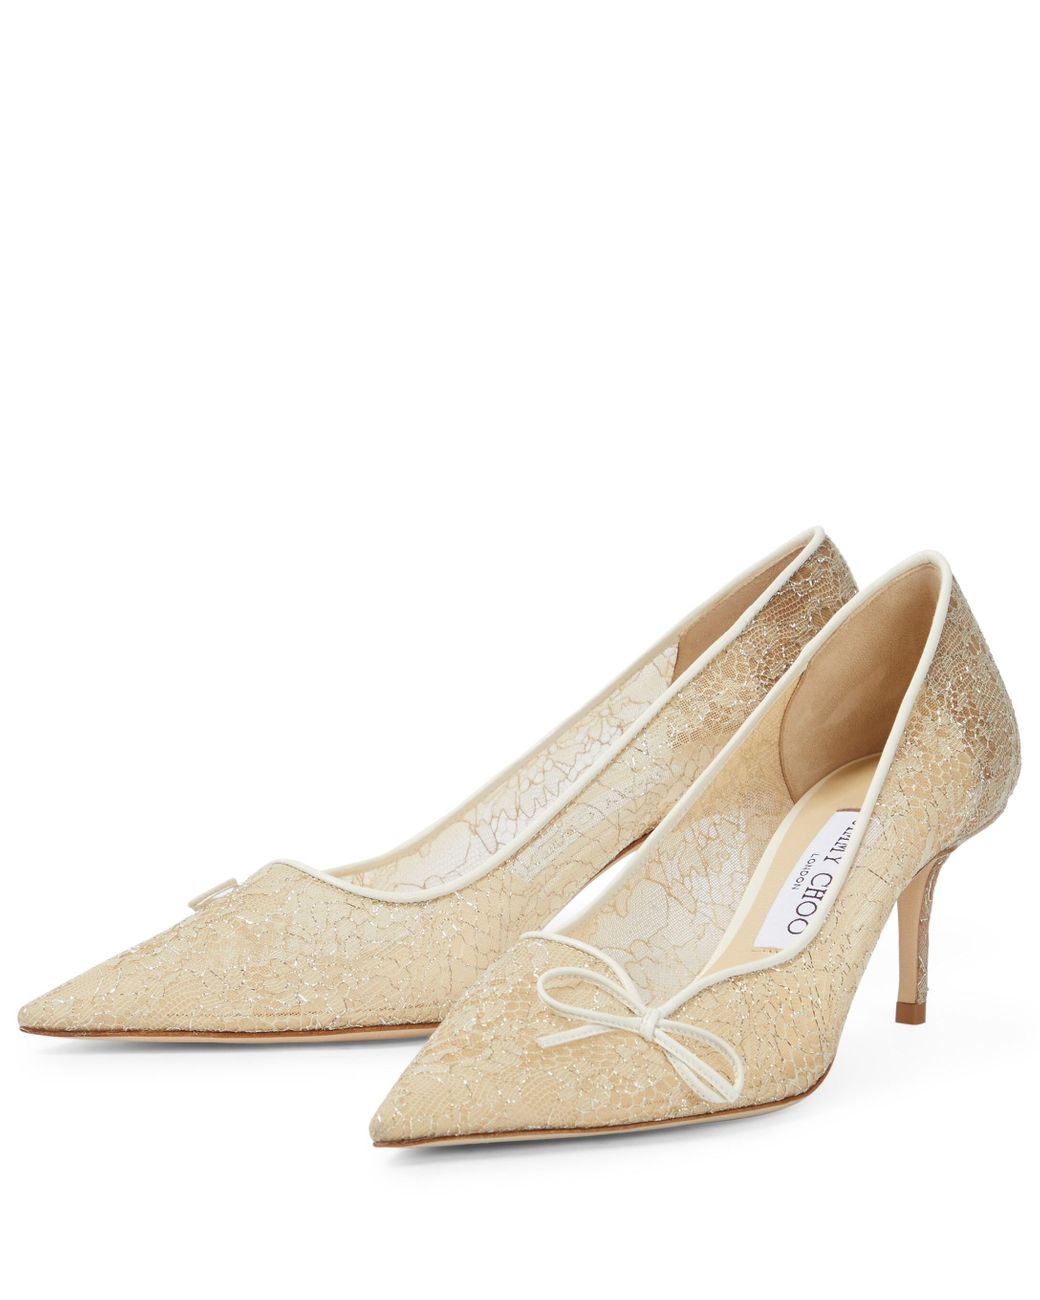 Jimmy Choo Cibelle 65 Lace Pumps in Natural | Lyst Canada